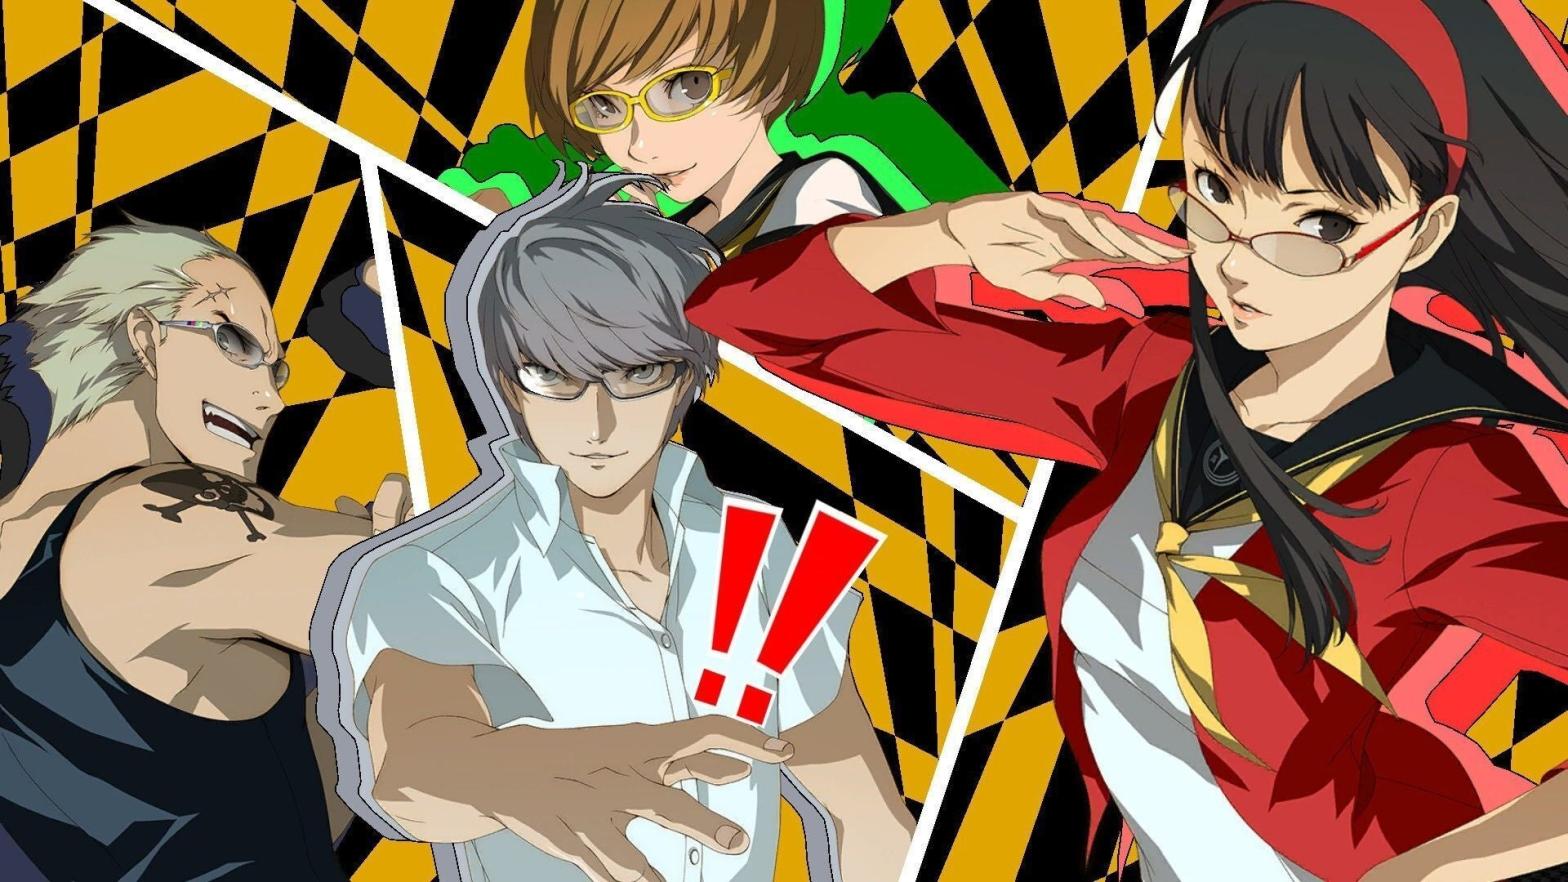 Just let me play Persona 4 Golden wherever I want. (Image: Atlus)